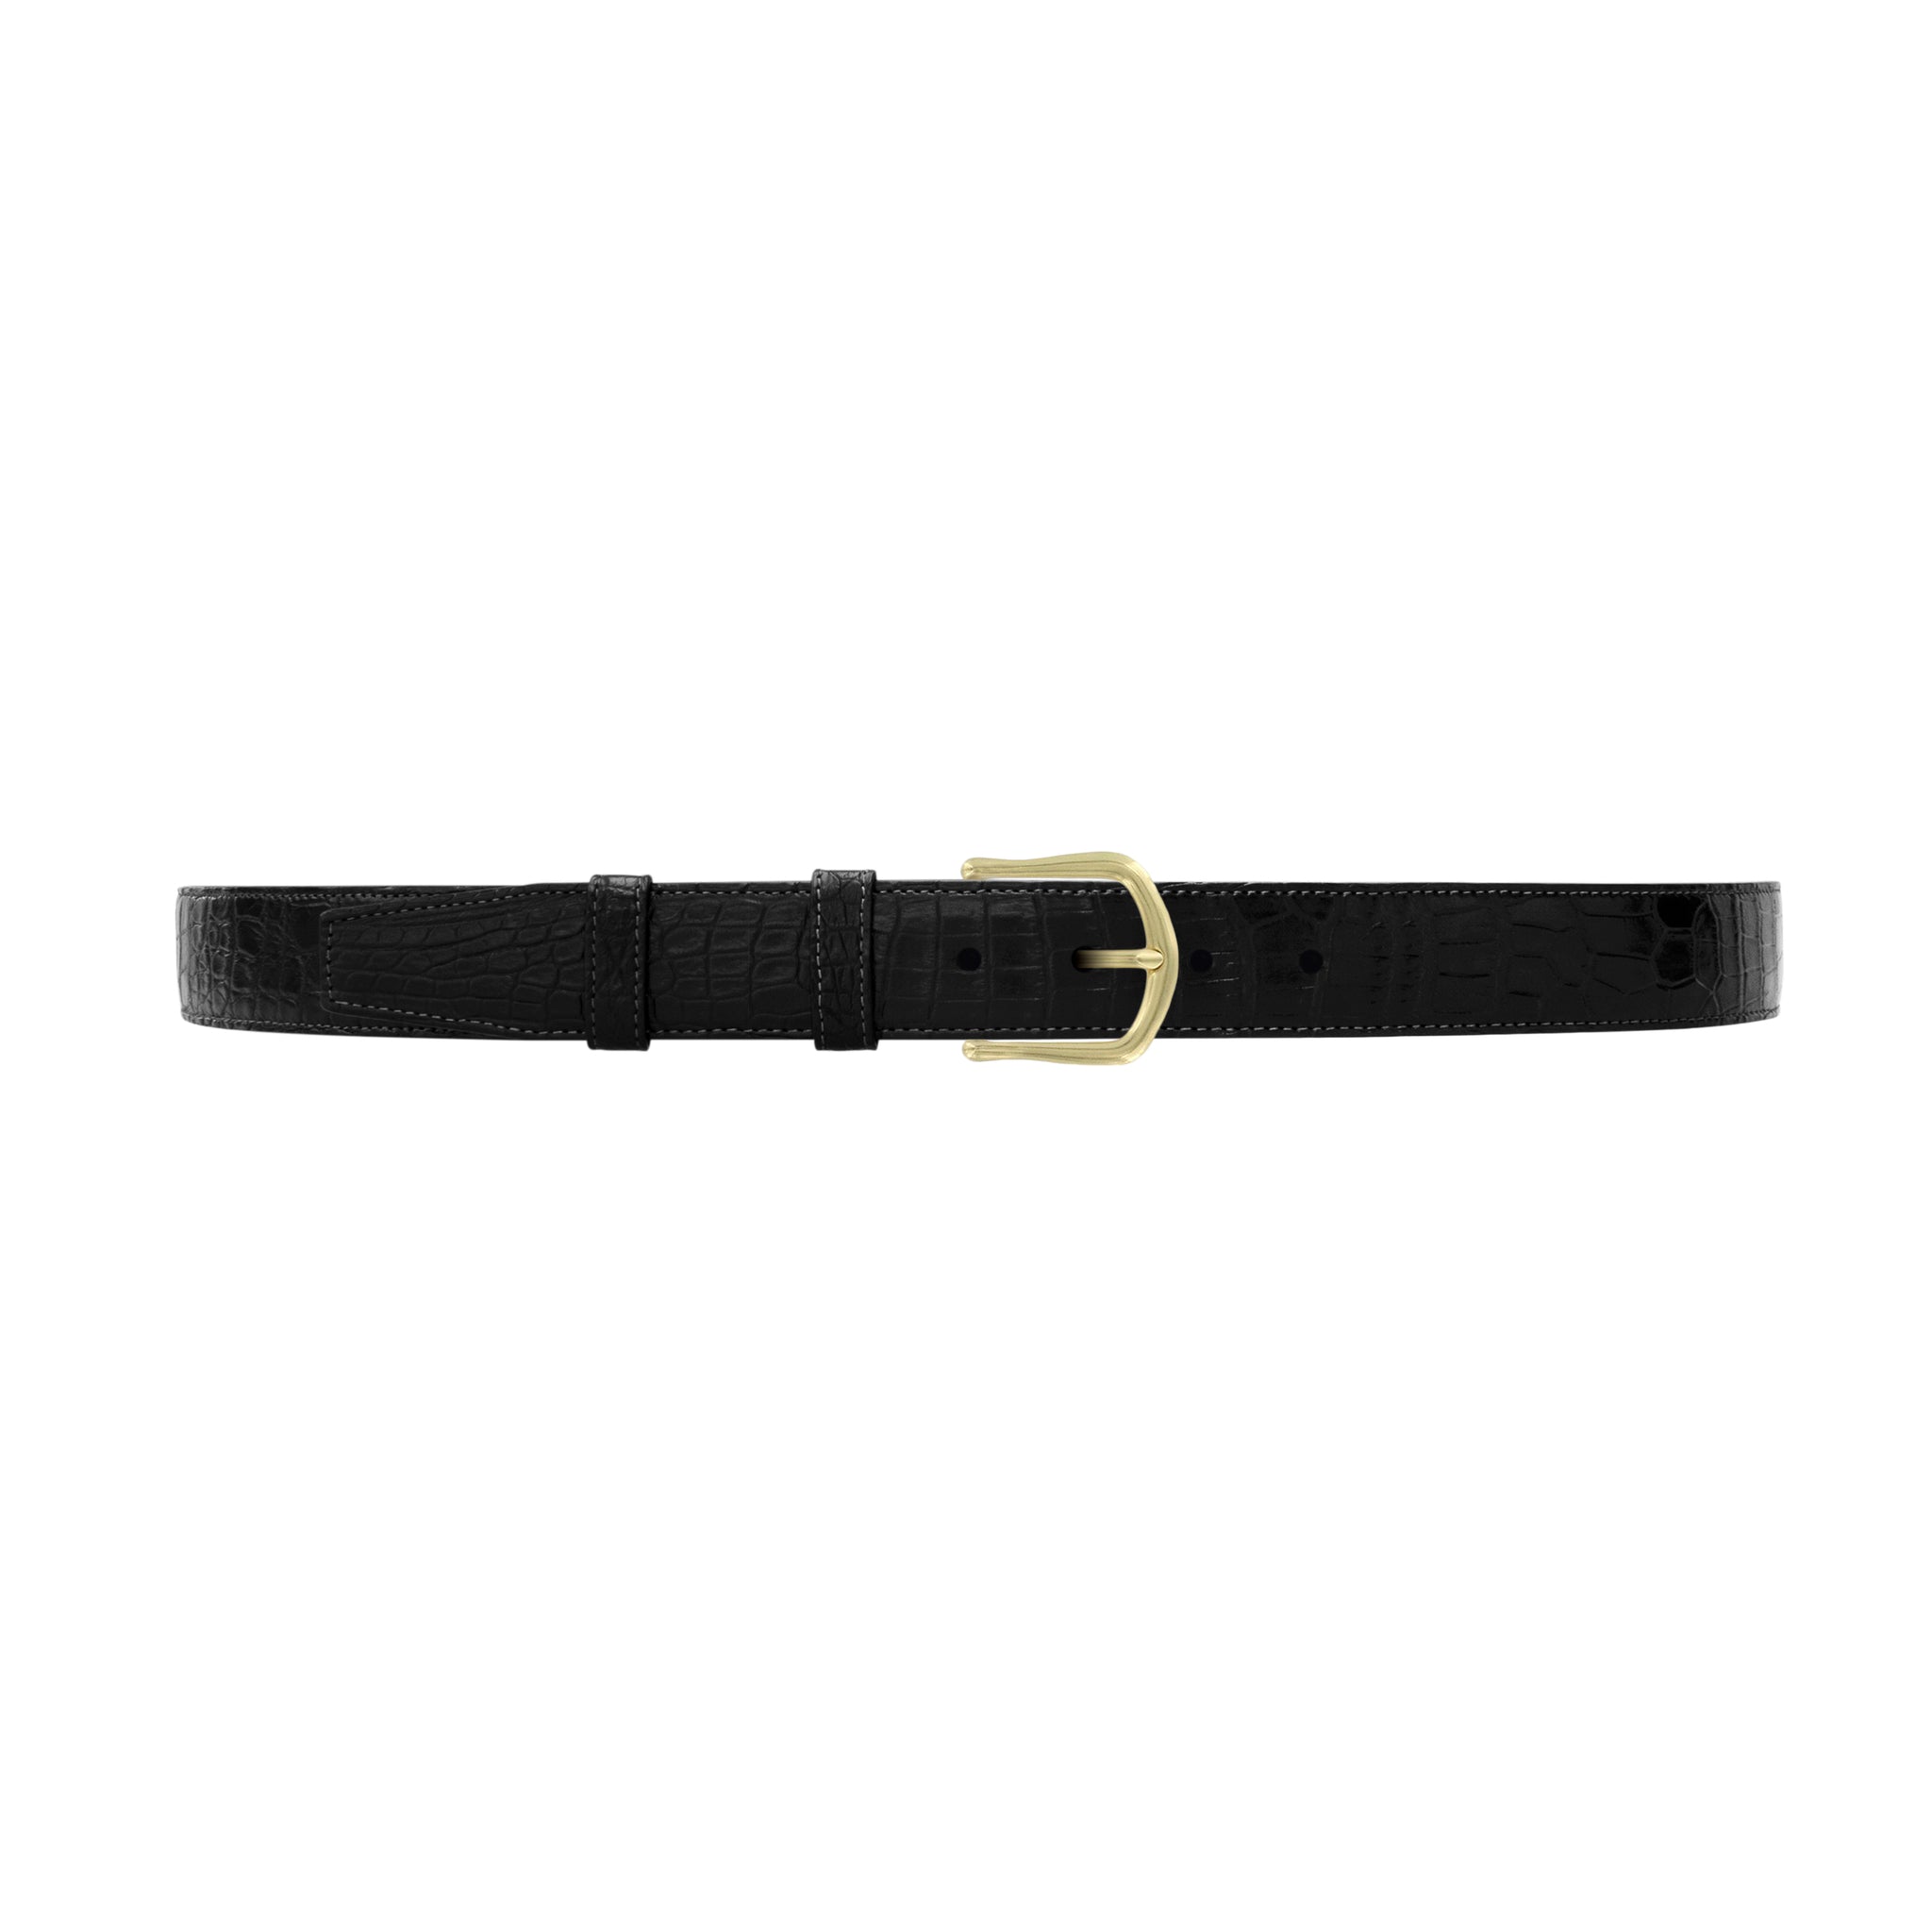 1 1/4" Raven Classic Belt with Derby Cocktail Buckle in Brass